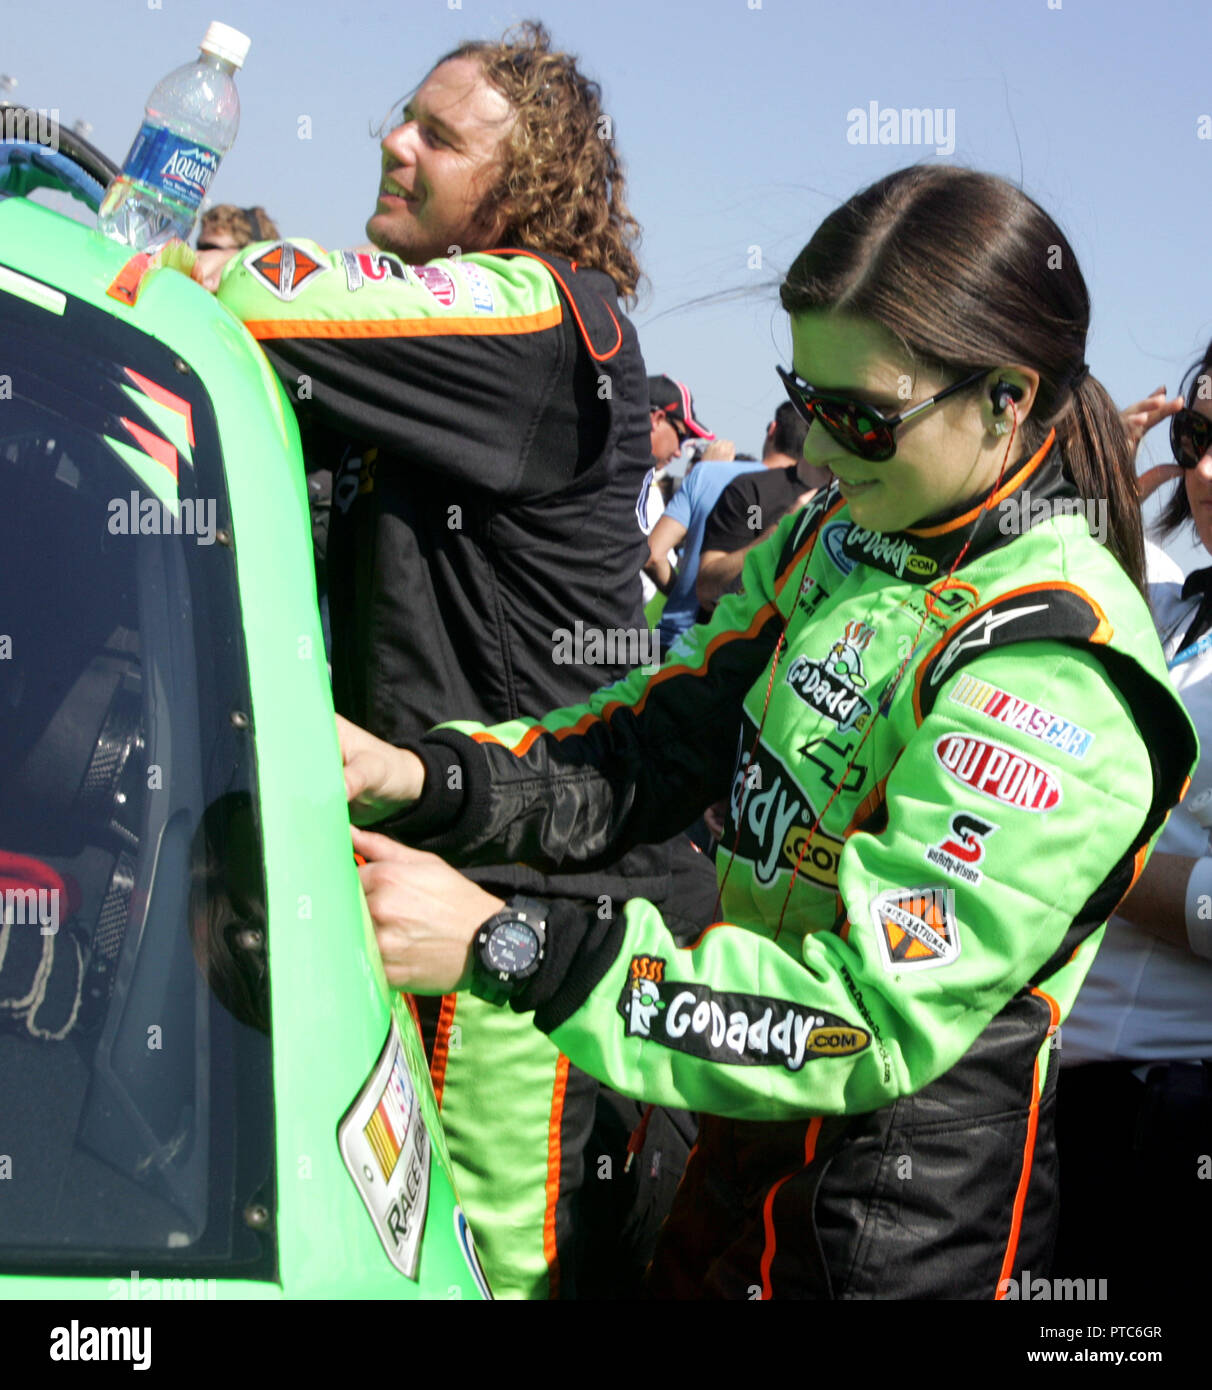 Danica Patrick checks the inside of her car just prior to the start of the NASCAR Nationwide Drive4COPD 300 at Daytona International Speedway in Daytona Beach, Florida on February 19, 2011. Stock Photo